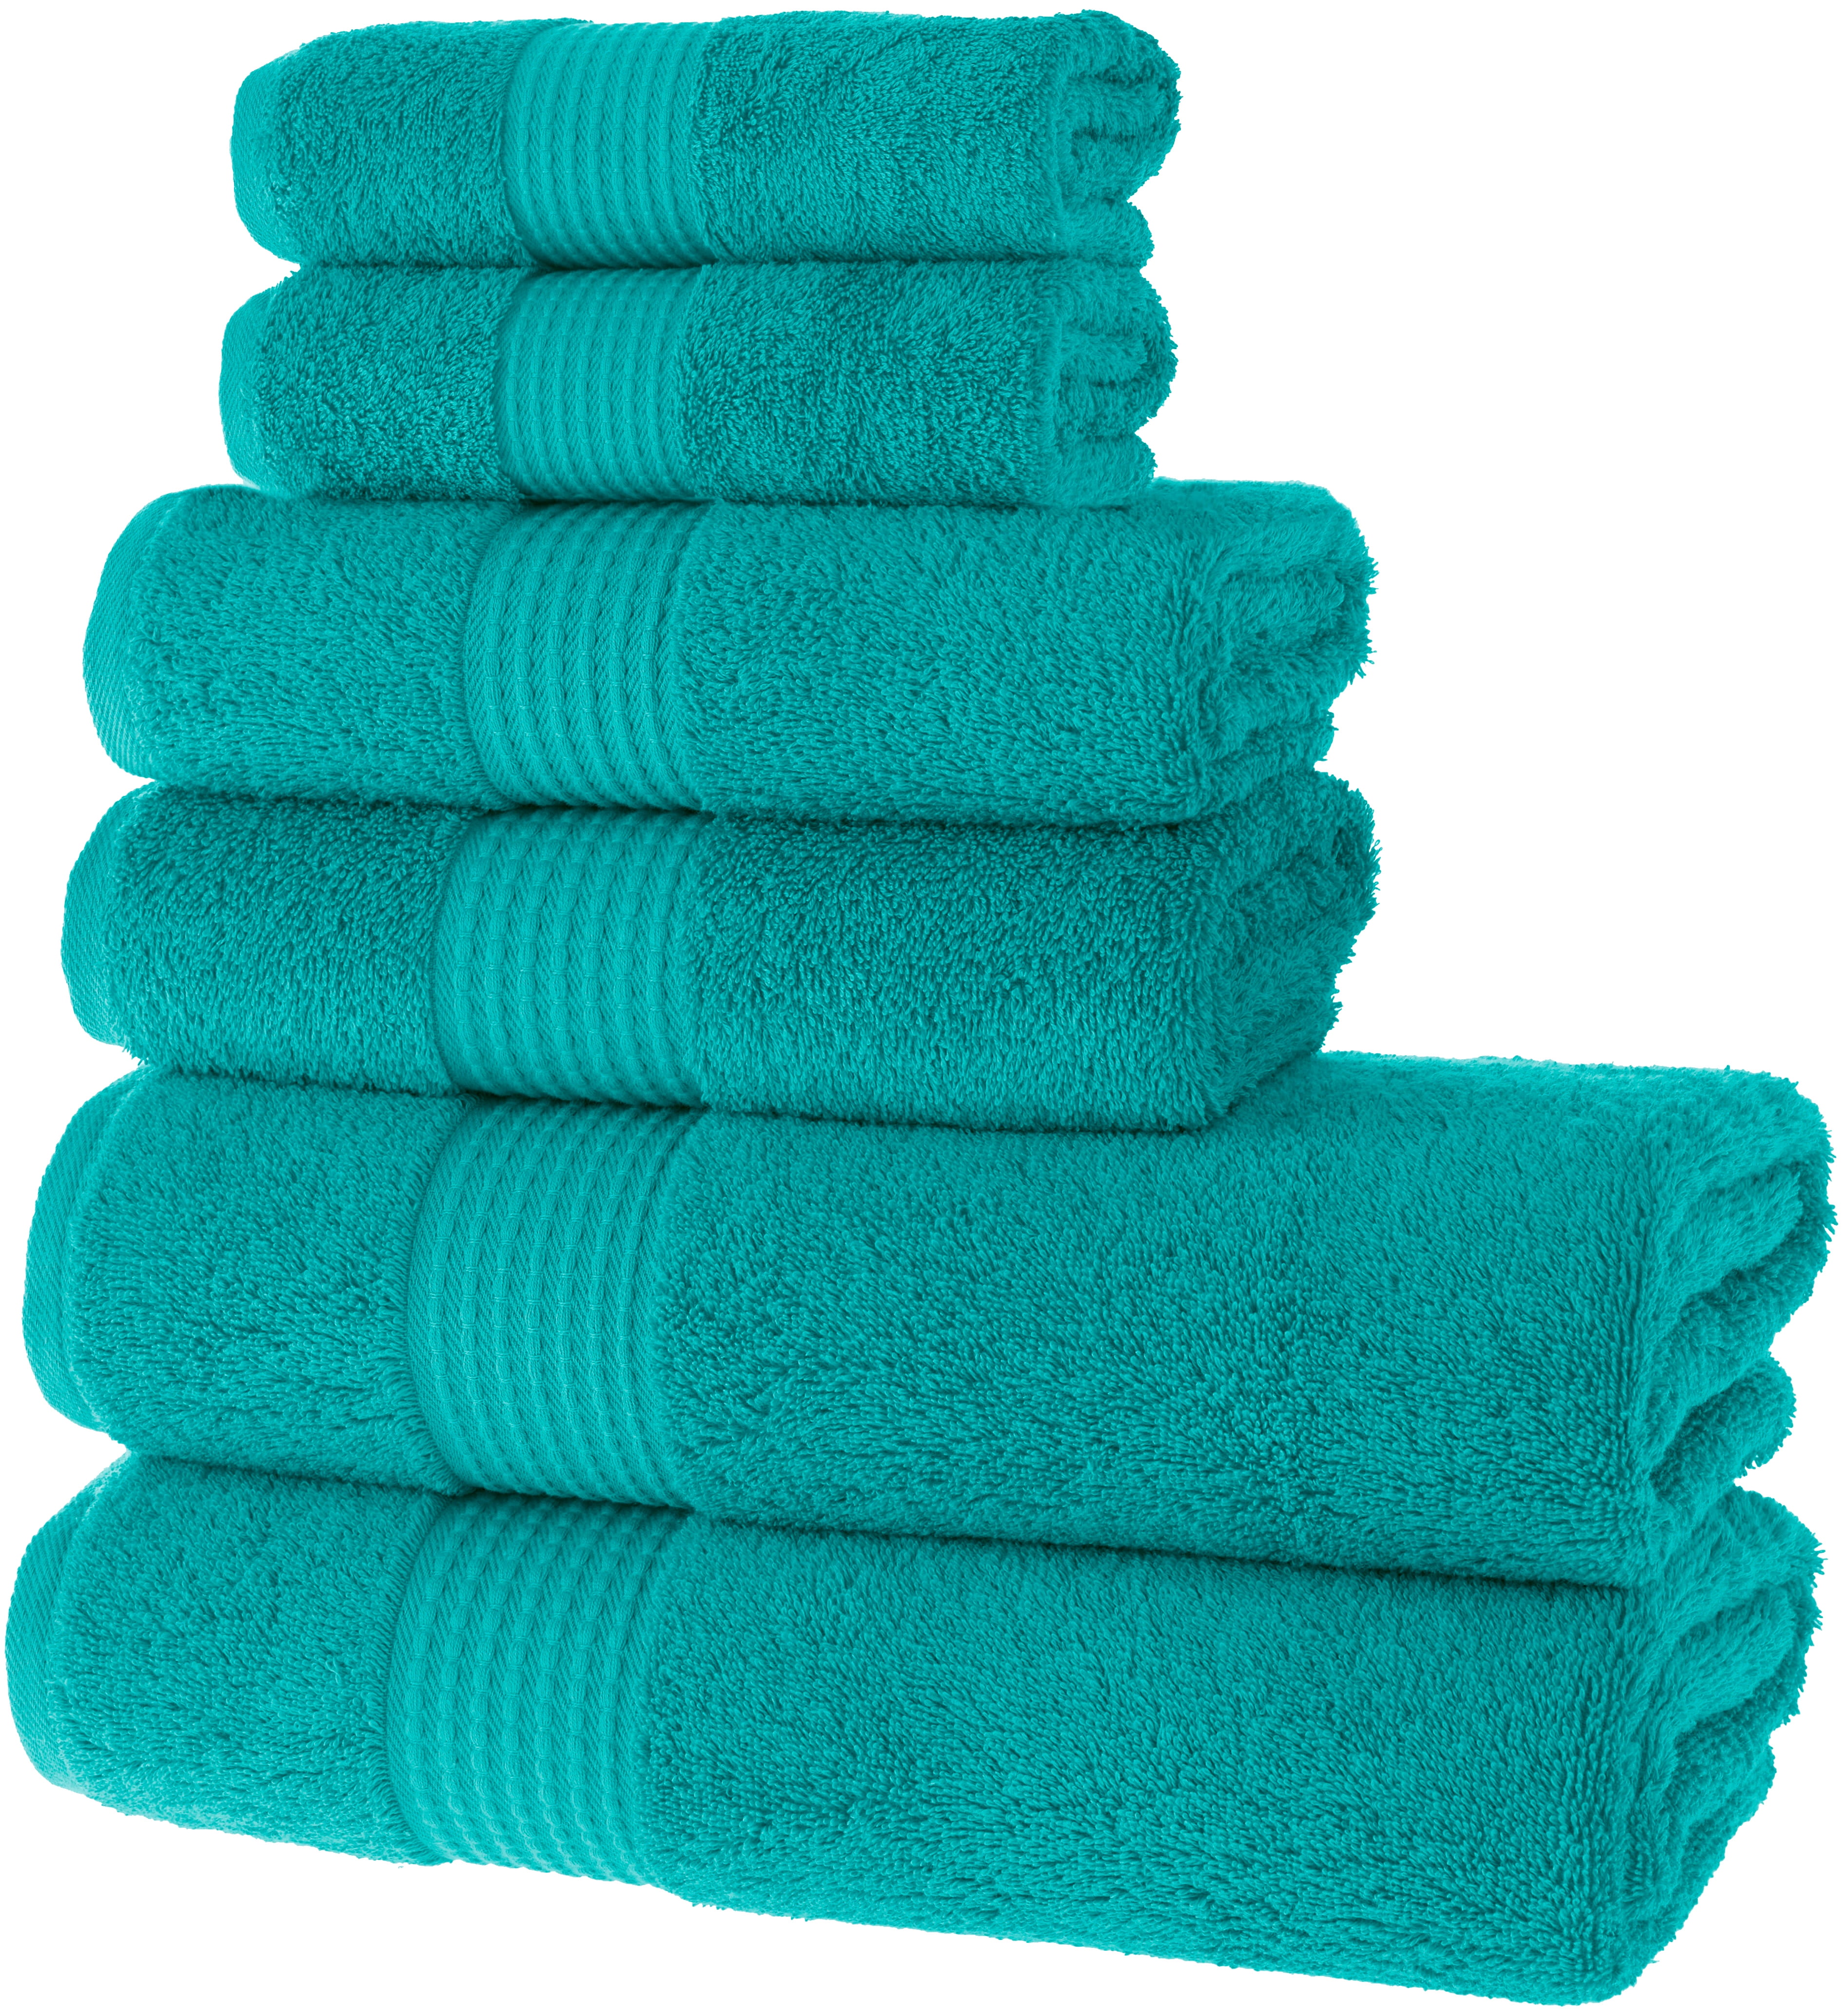 Maura Basics Performance Wash Cloths with Hanging Loop. 13x13 American Standard Towel Size. Soft, Durable, Long Lasting and Absorbent | 100% Turkish